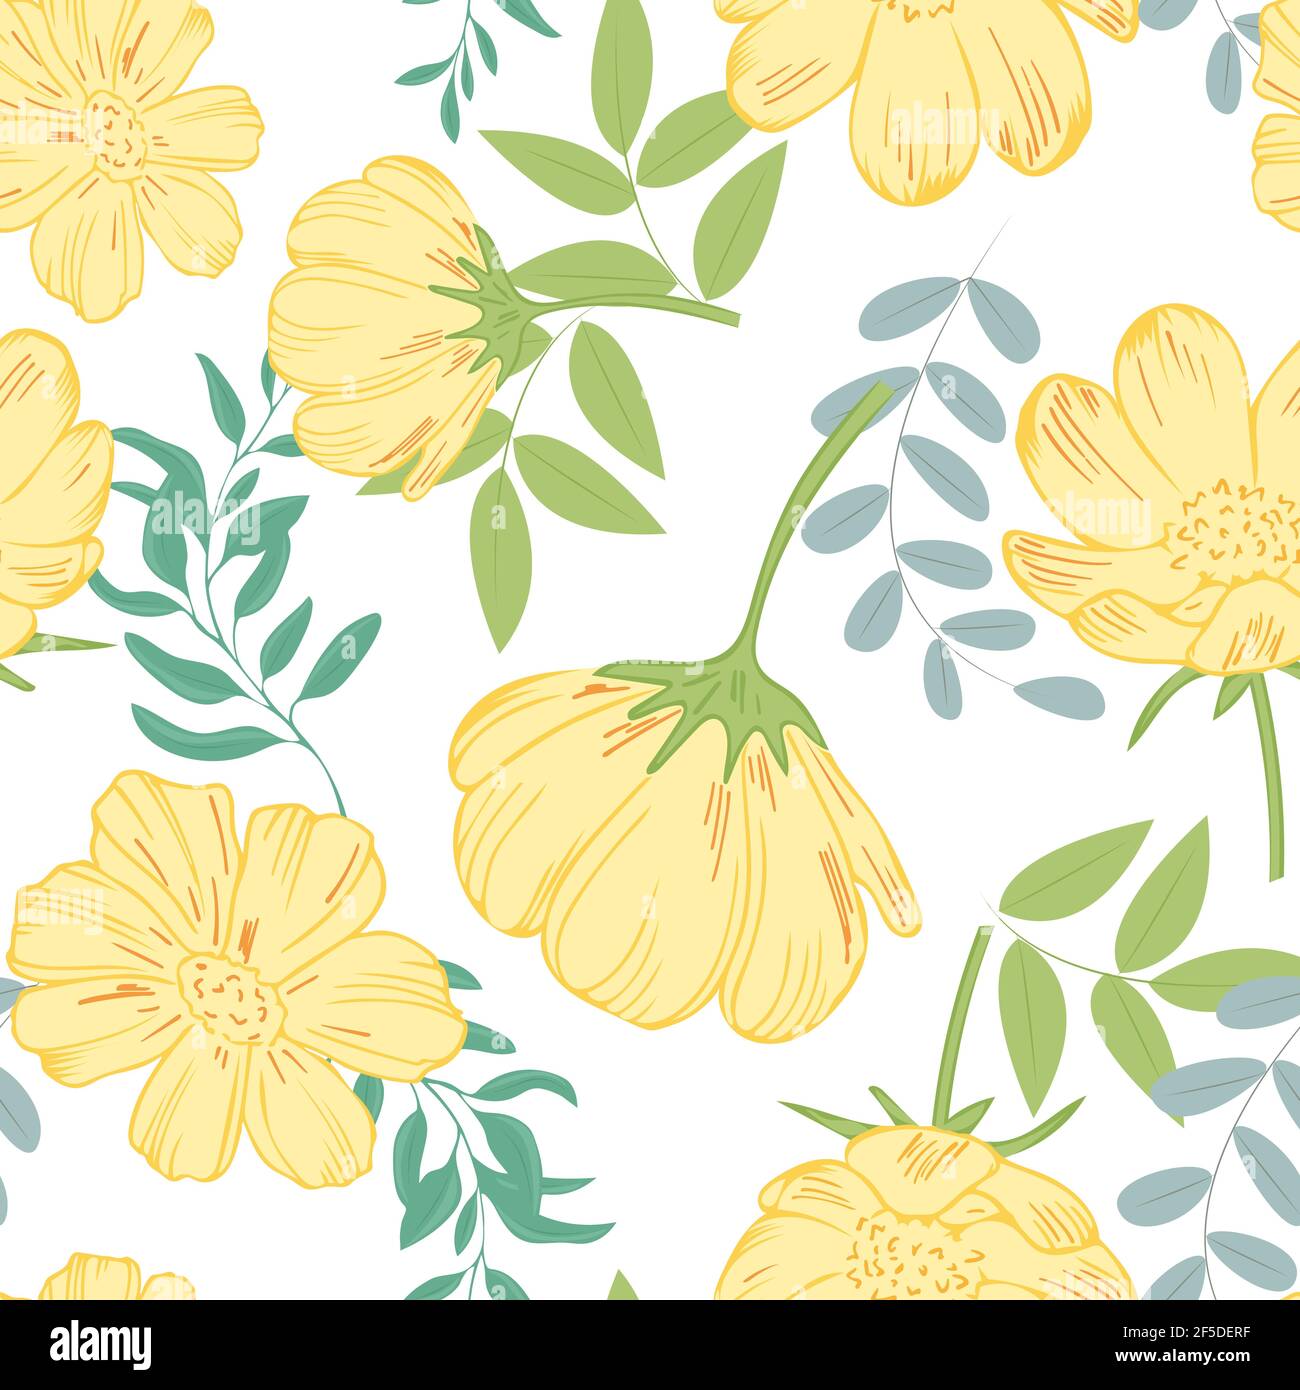 Seamless background with yellow flowers and leaves. A repeating continuous pattern with vibrant spring flowers. Vector. Stock Vector